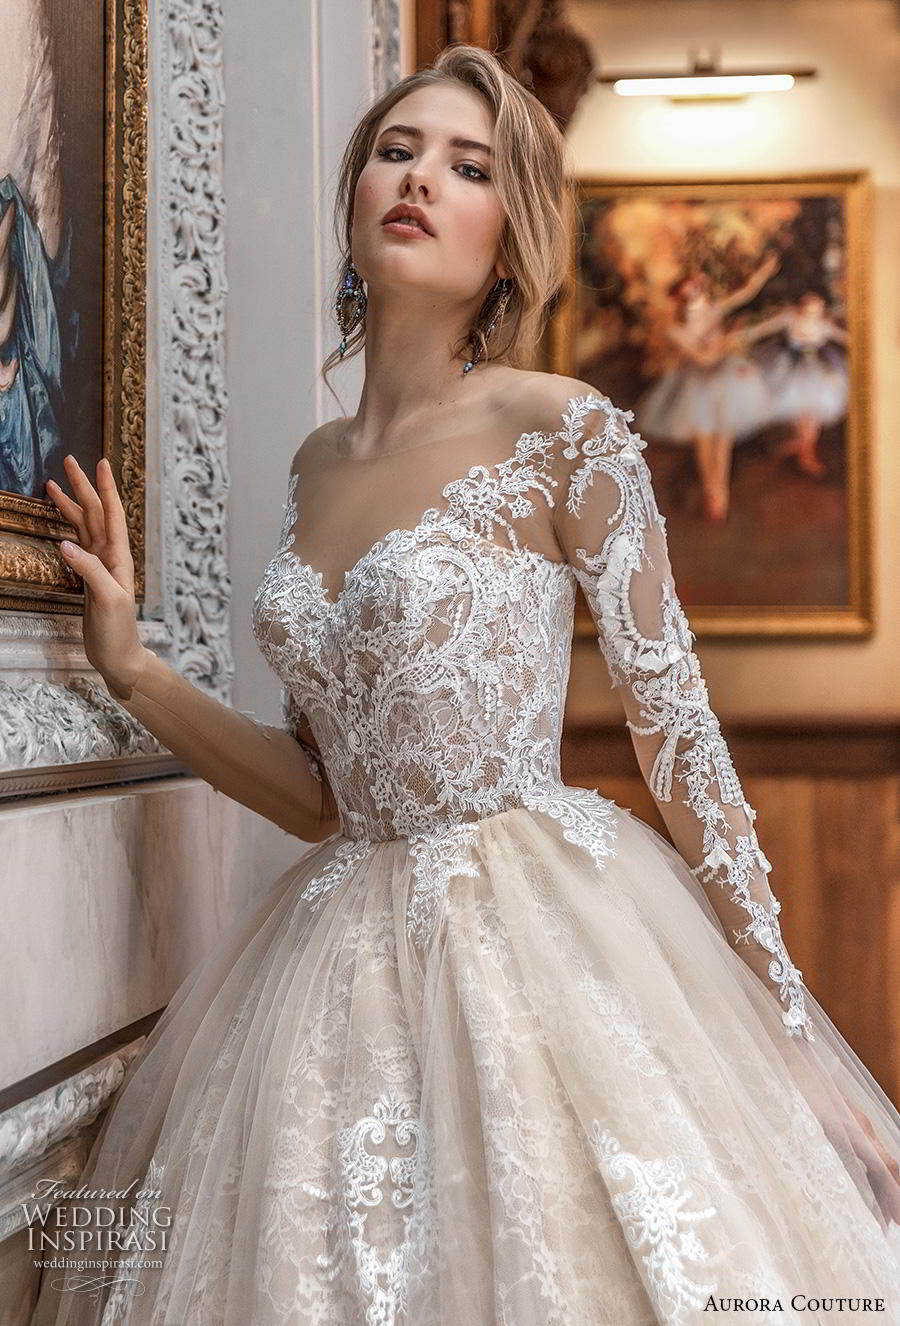 Aurora Couture 2019 Wedding Dresses — “Russian Glory” Bridal Collection ...